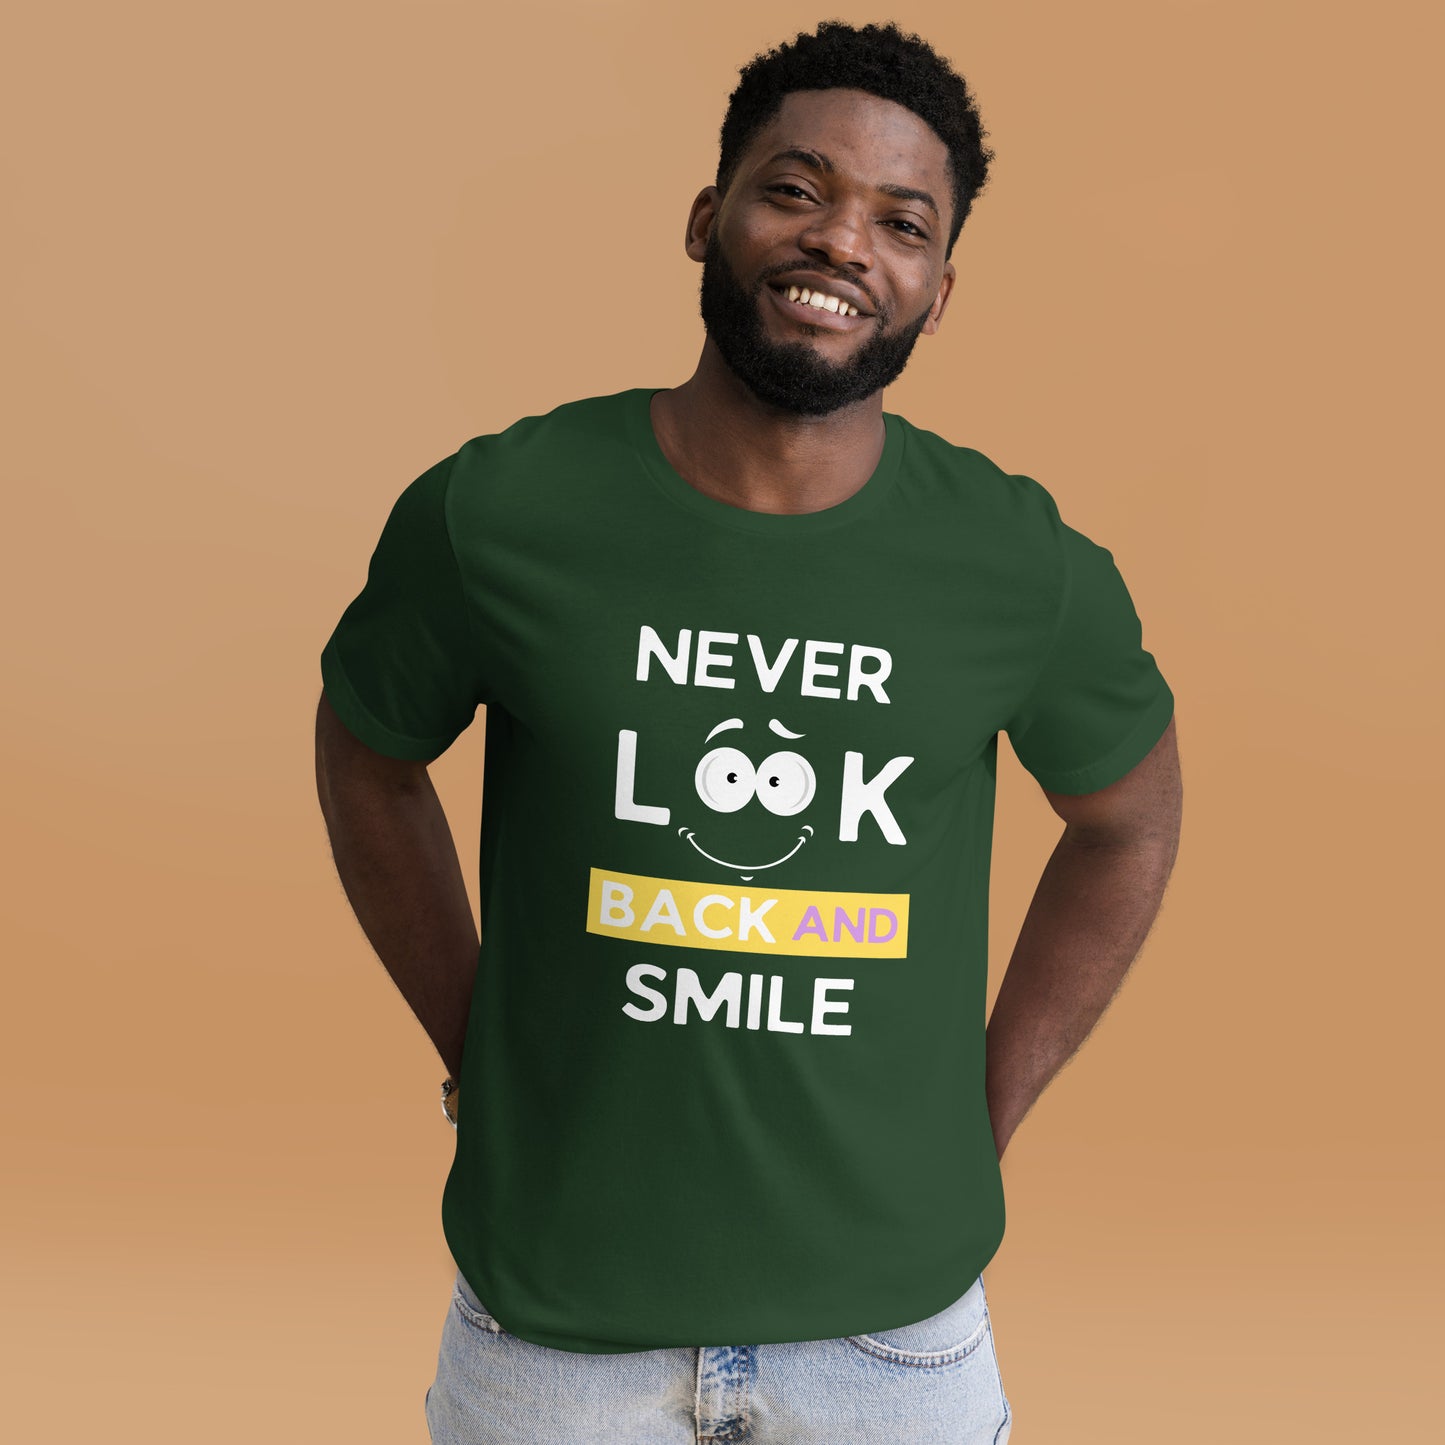 Never look back t-shirt